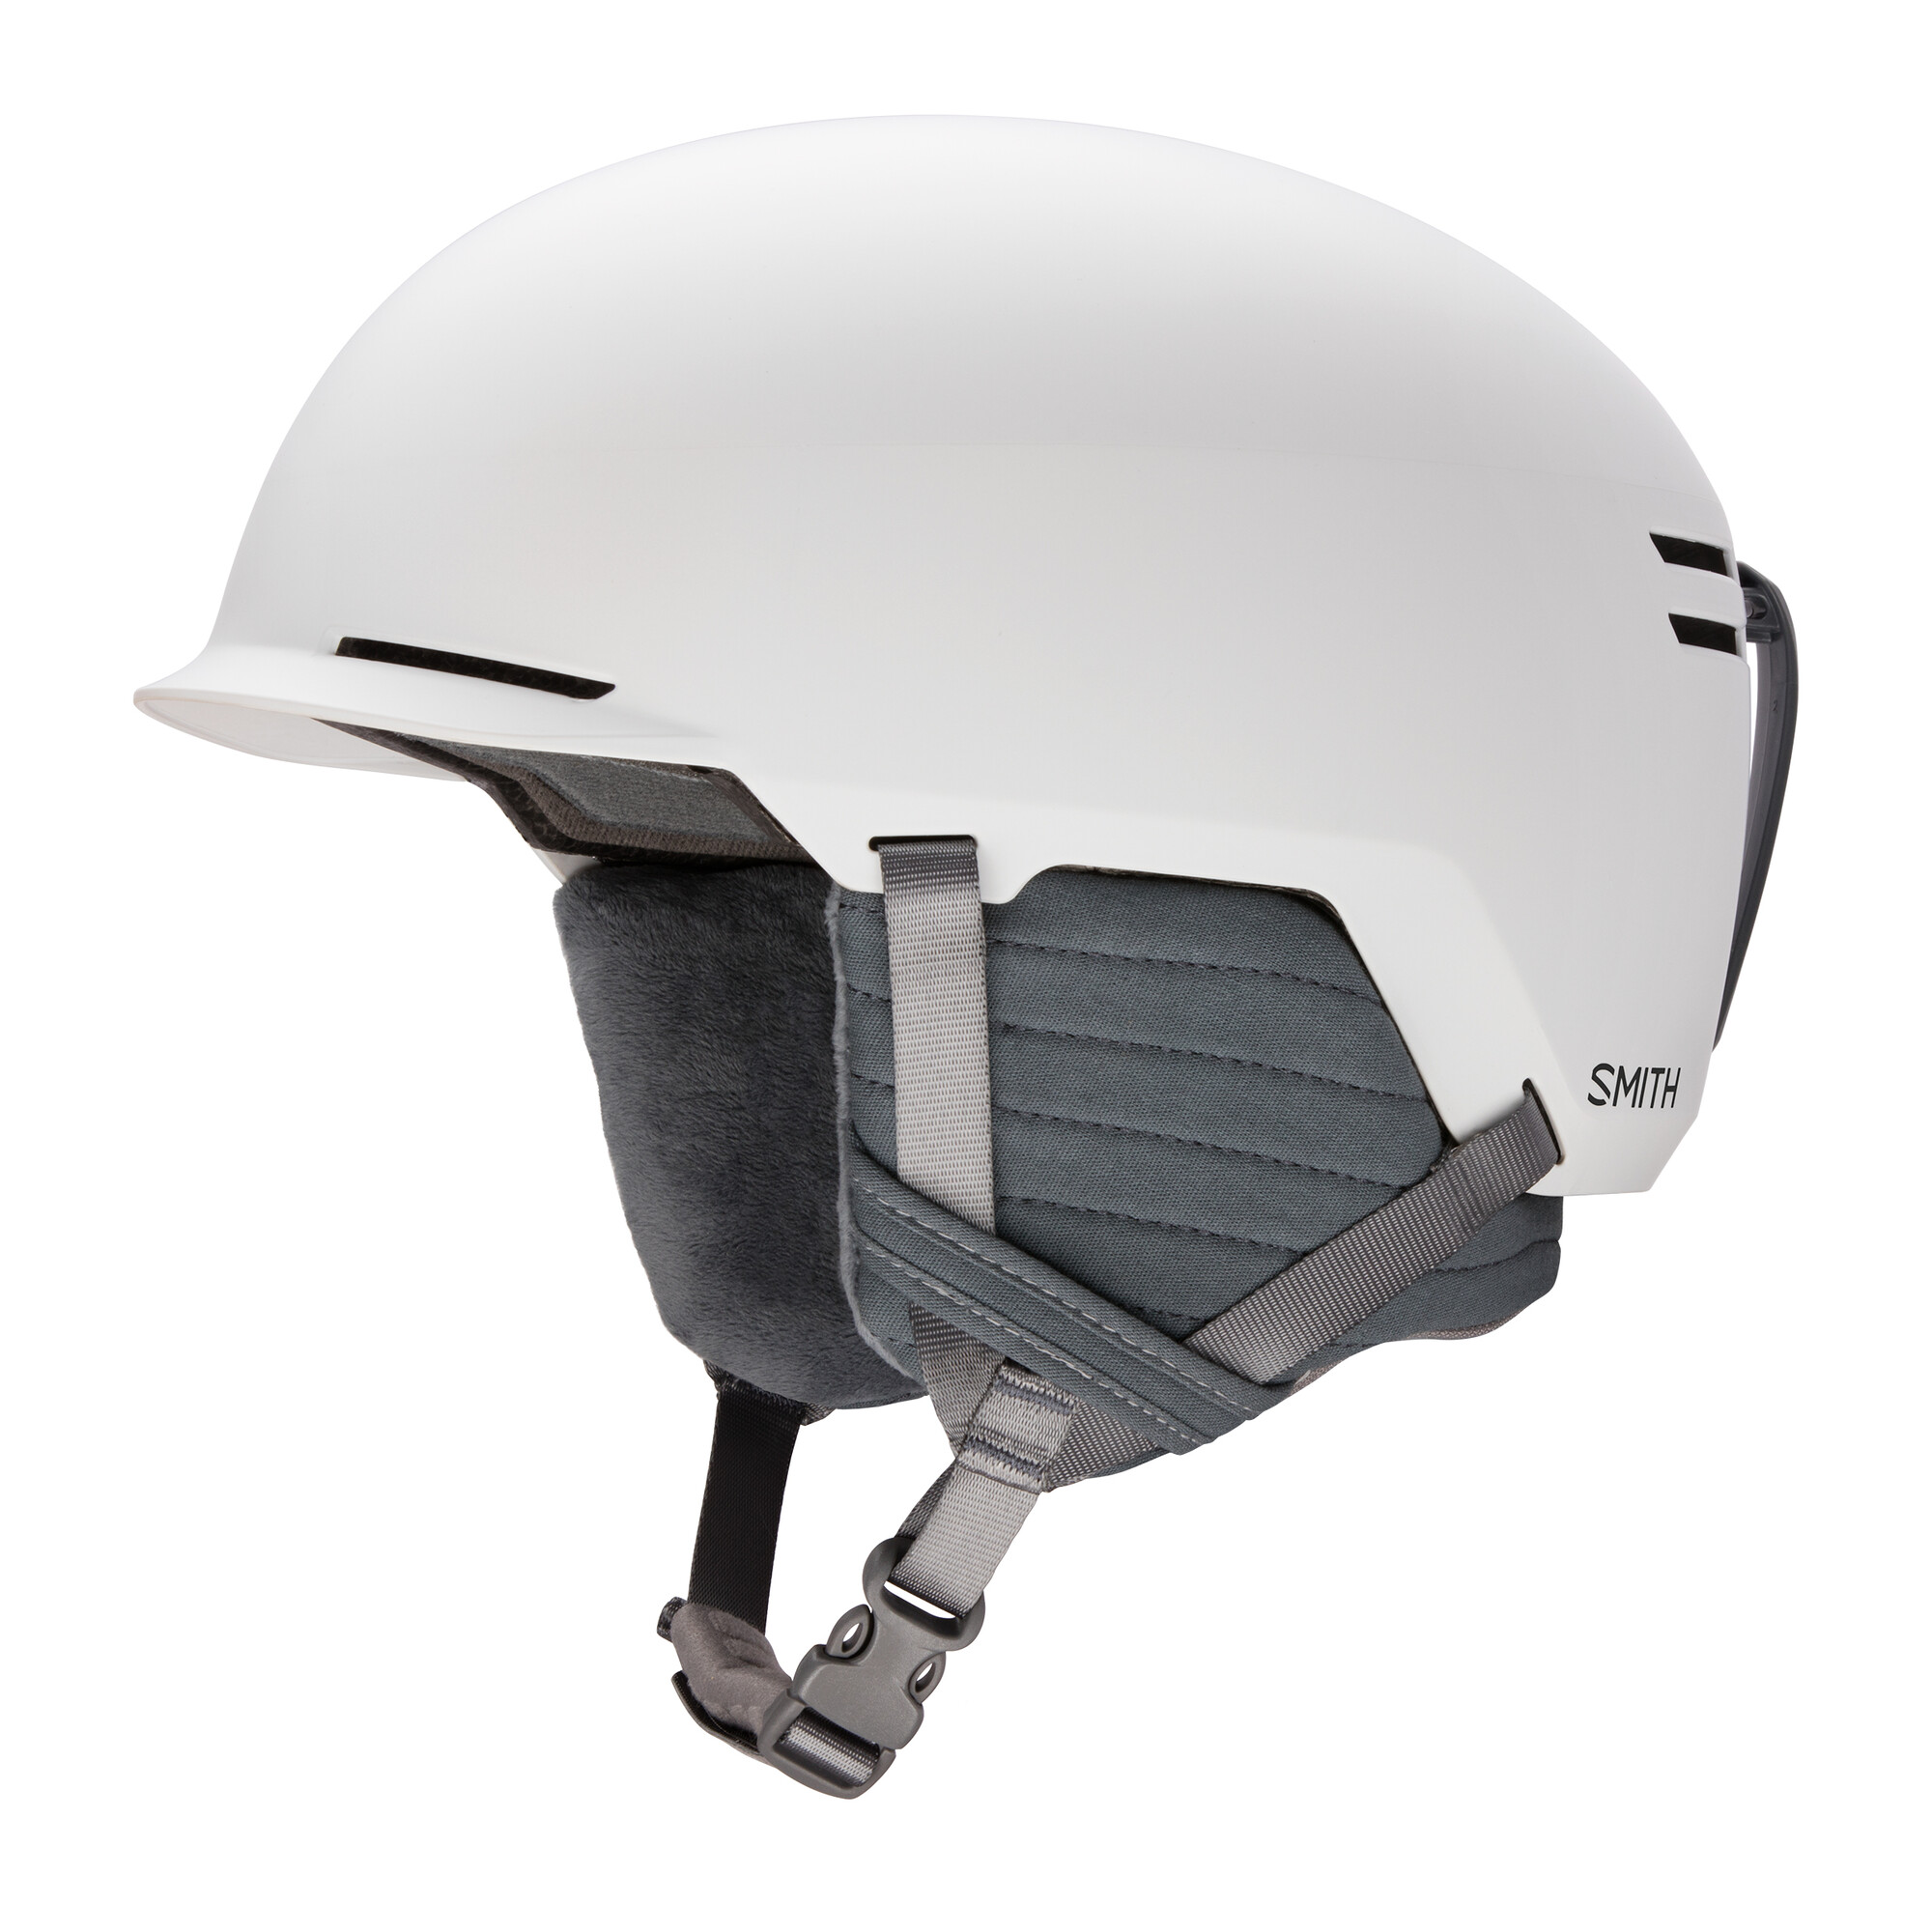 Smith Scout helm matte white